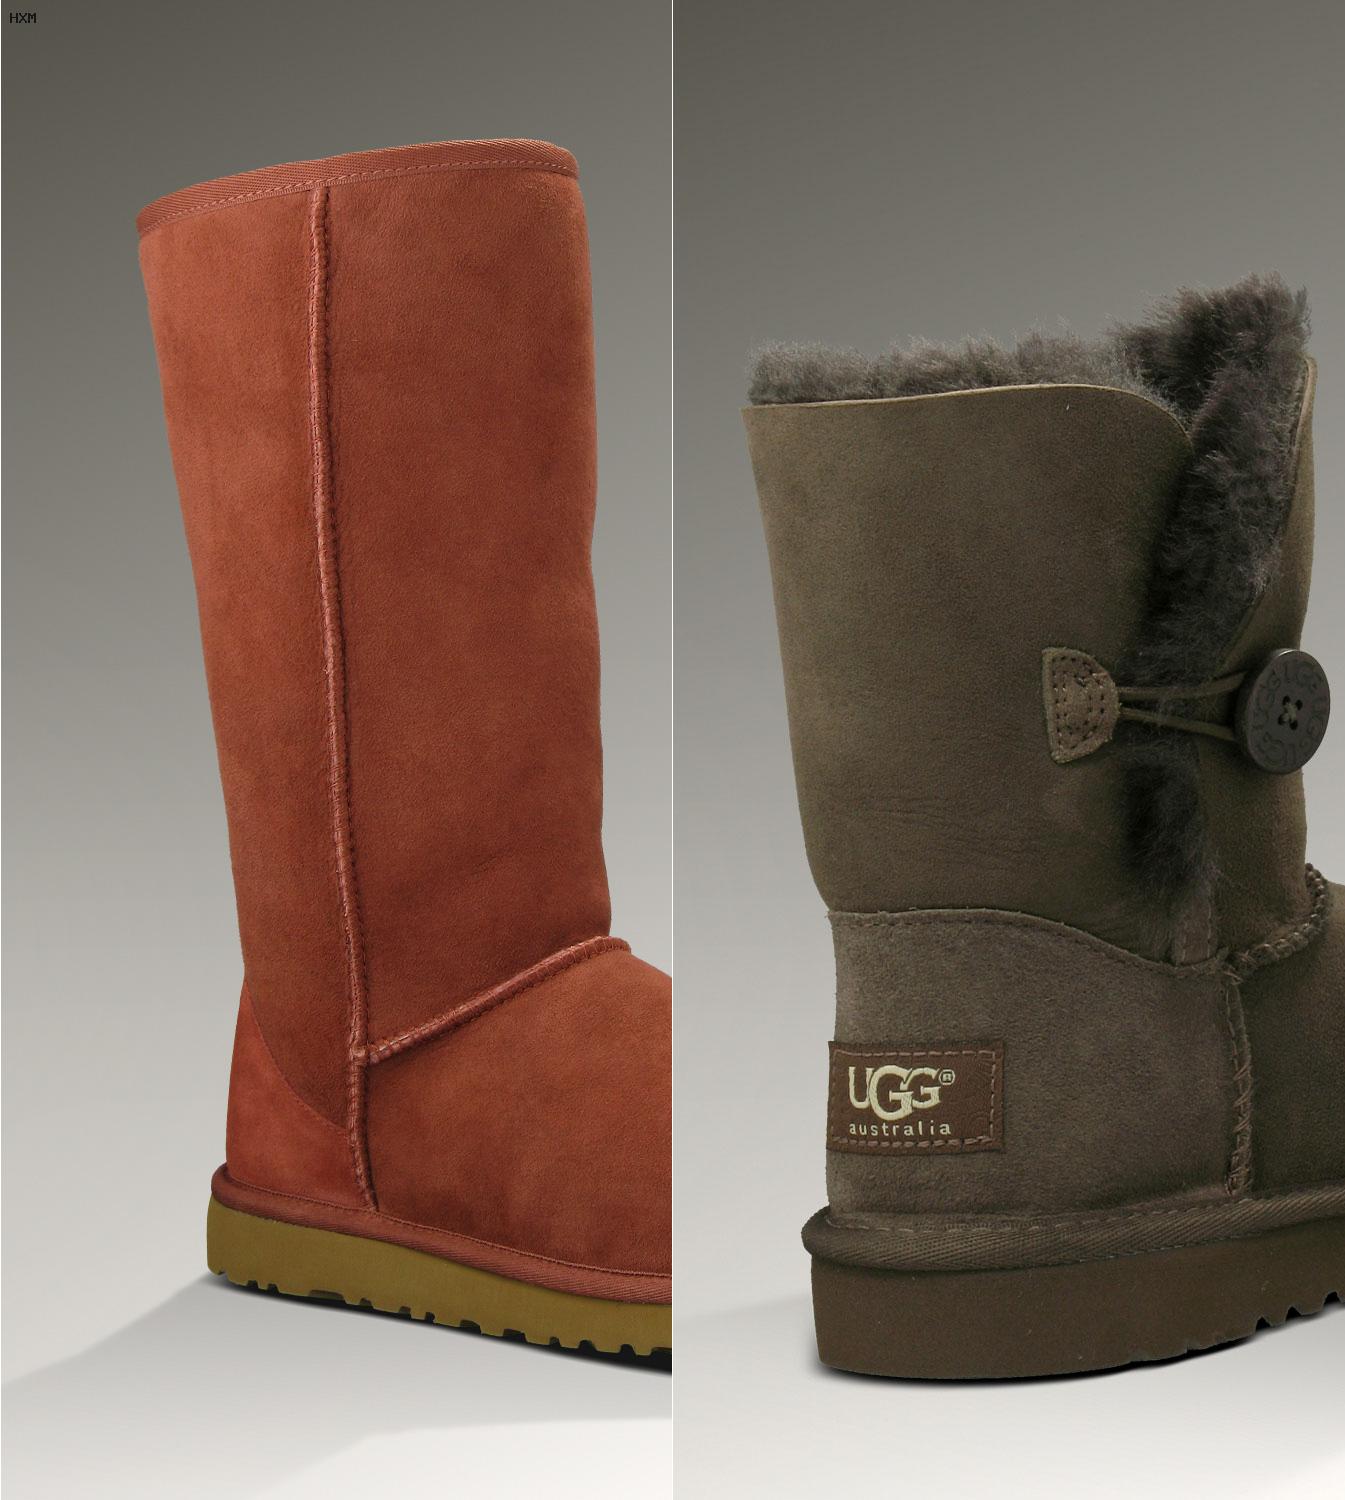 ugg boots cost in australia